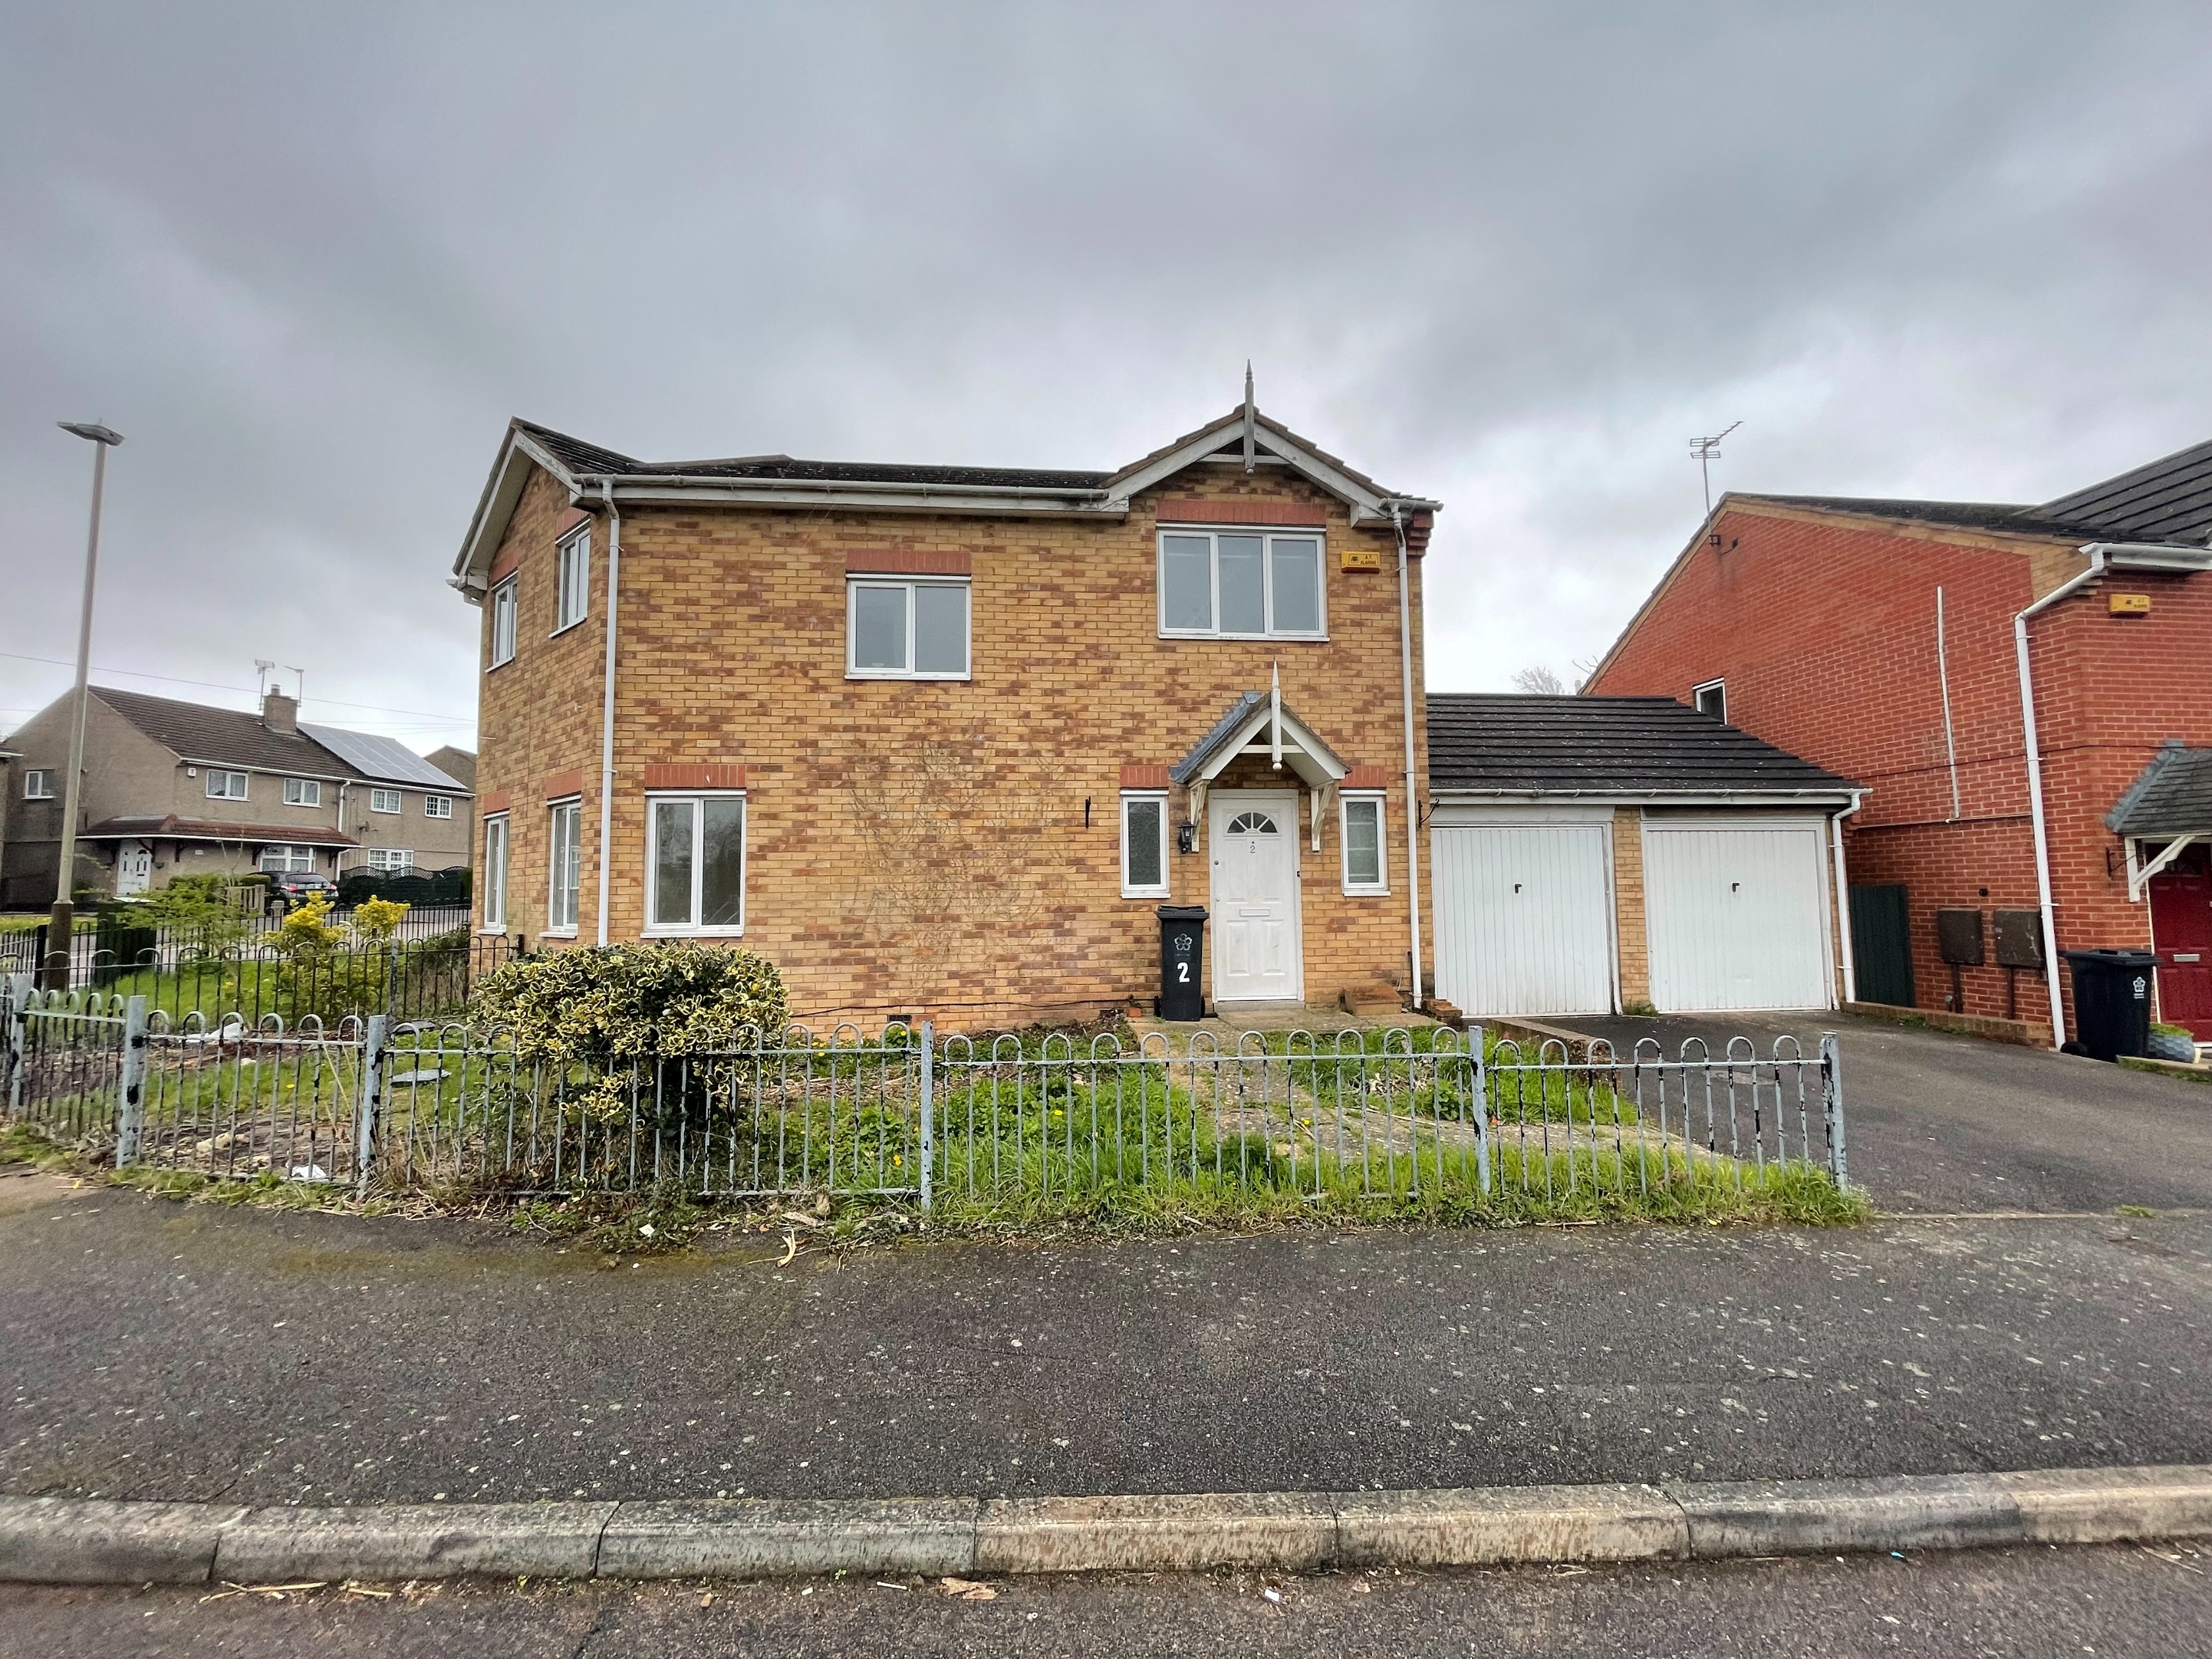 2 bed Semi-detached House for rent in Leicester. From Belvoir - Leicester